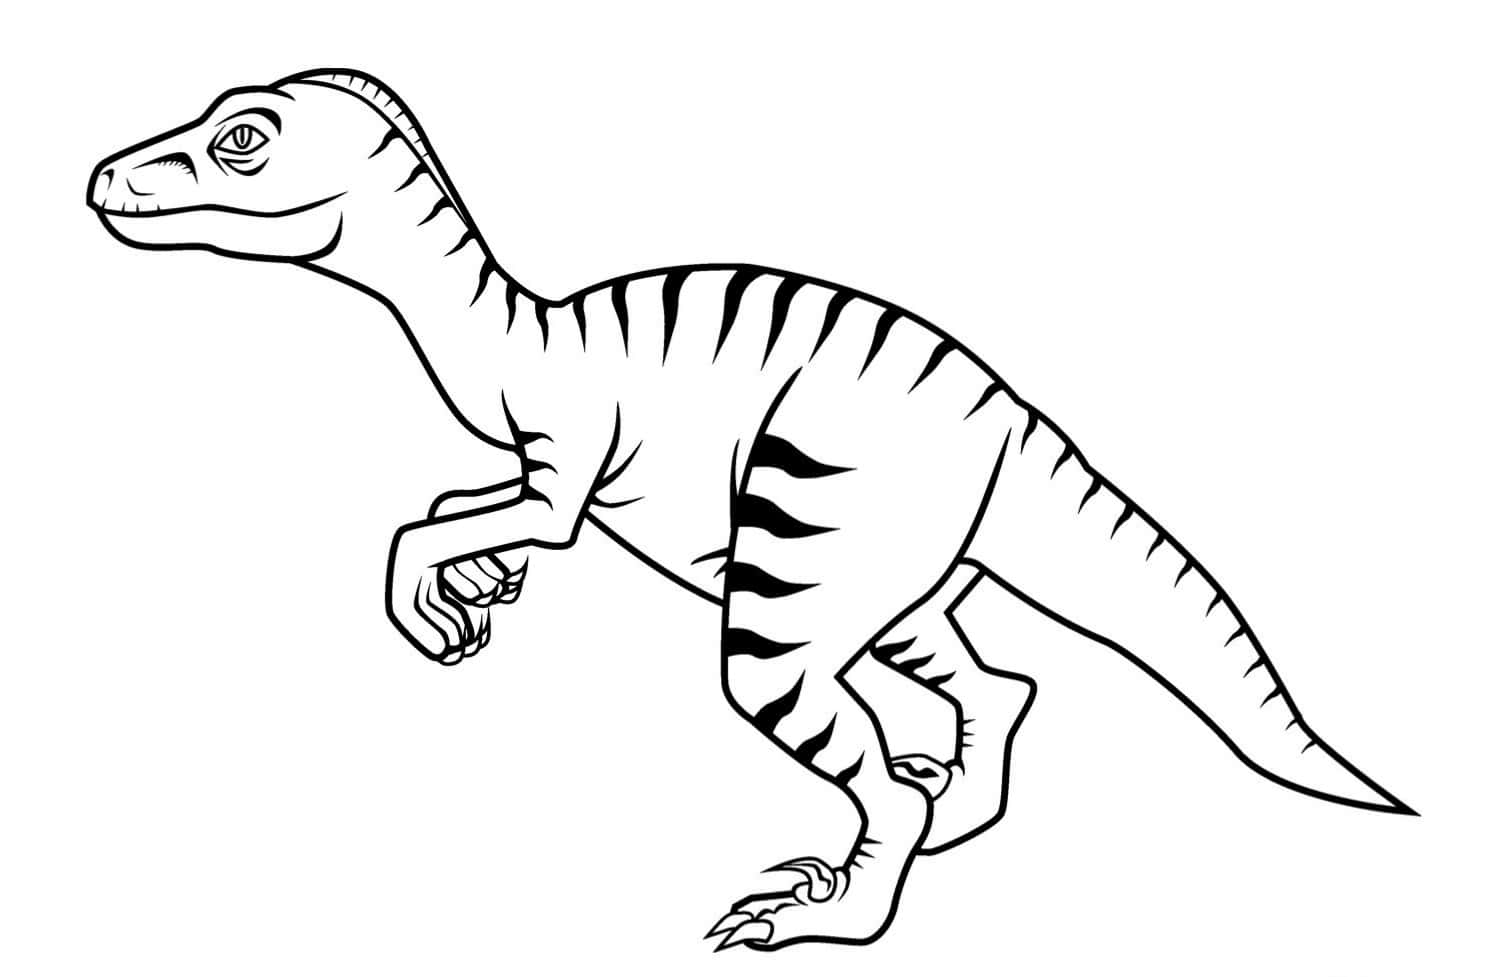 Color in the Fun with Dinosaur Coloring Pictures